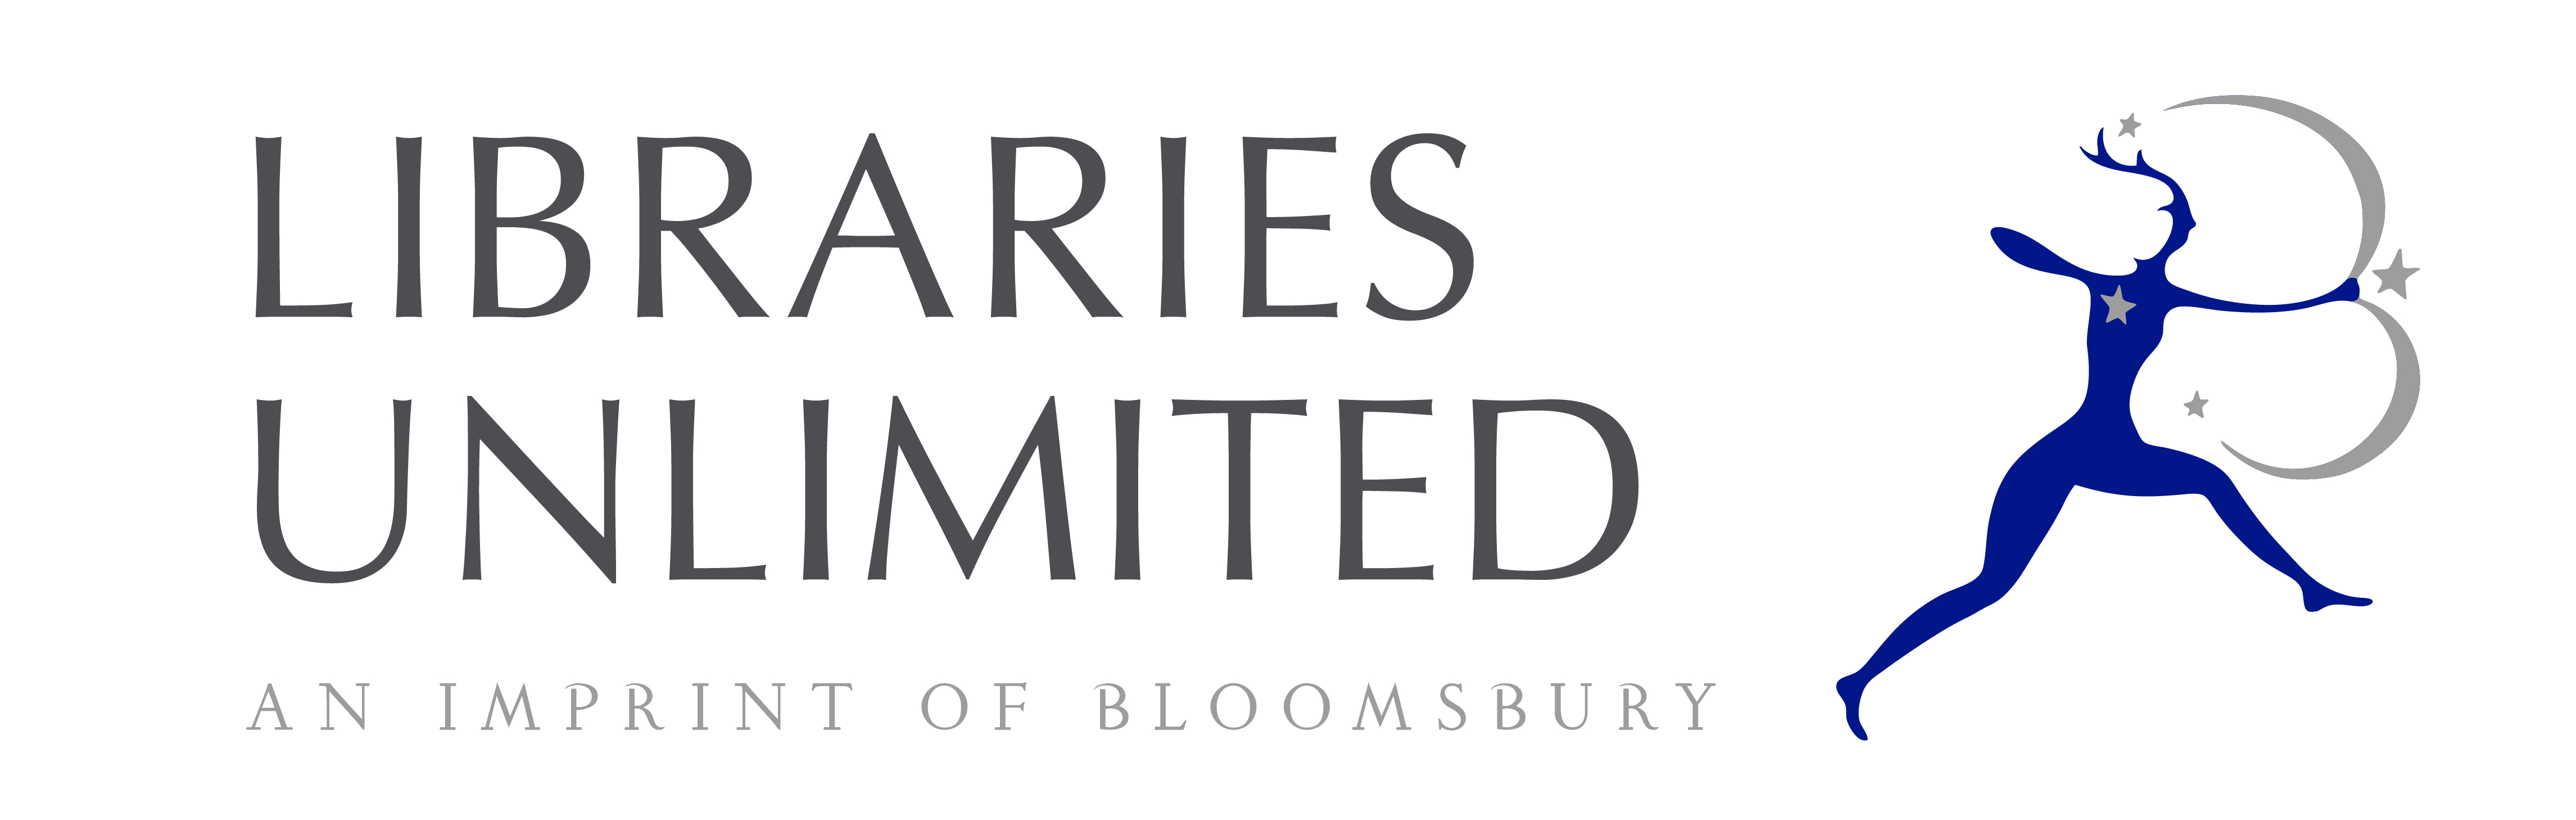 Libraries Unlimited Logo